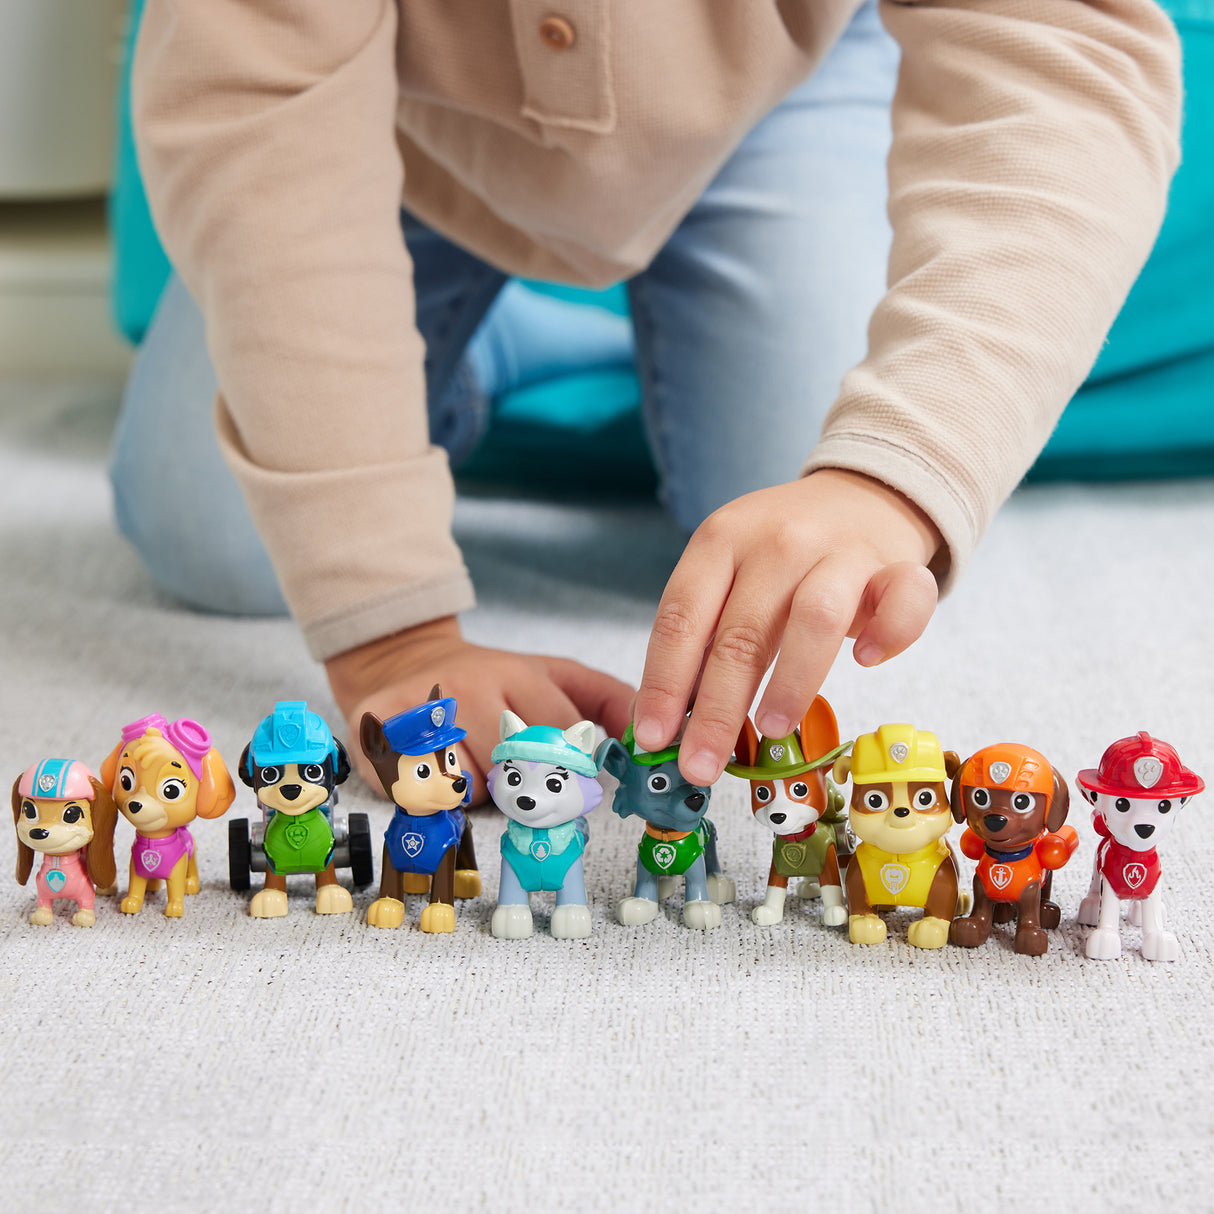 PAW Patrol All Paws Figure Gift Pack